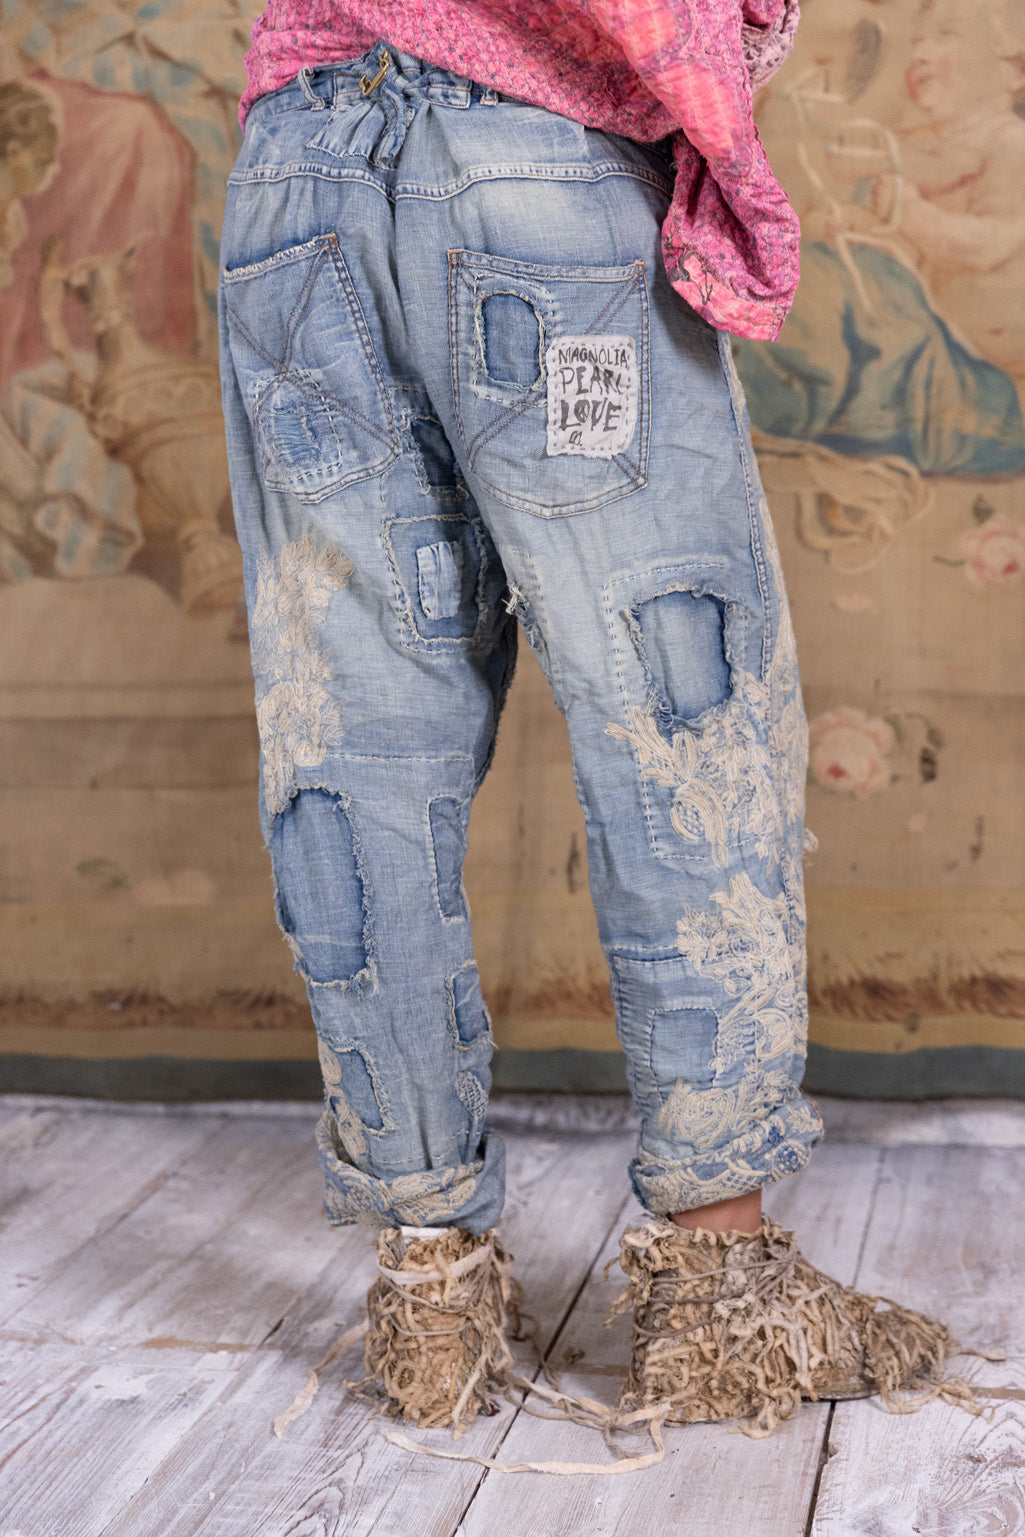 Magnolia Pearl - Lace Embroidered Miner Denims